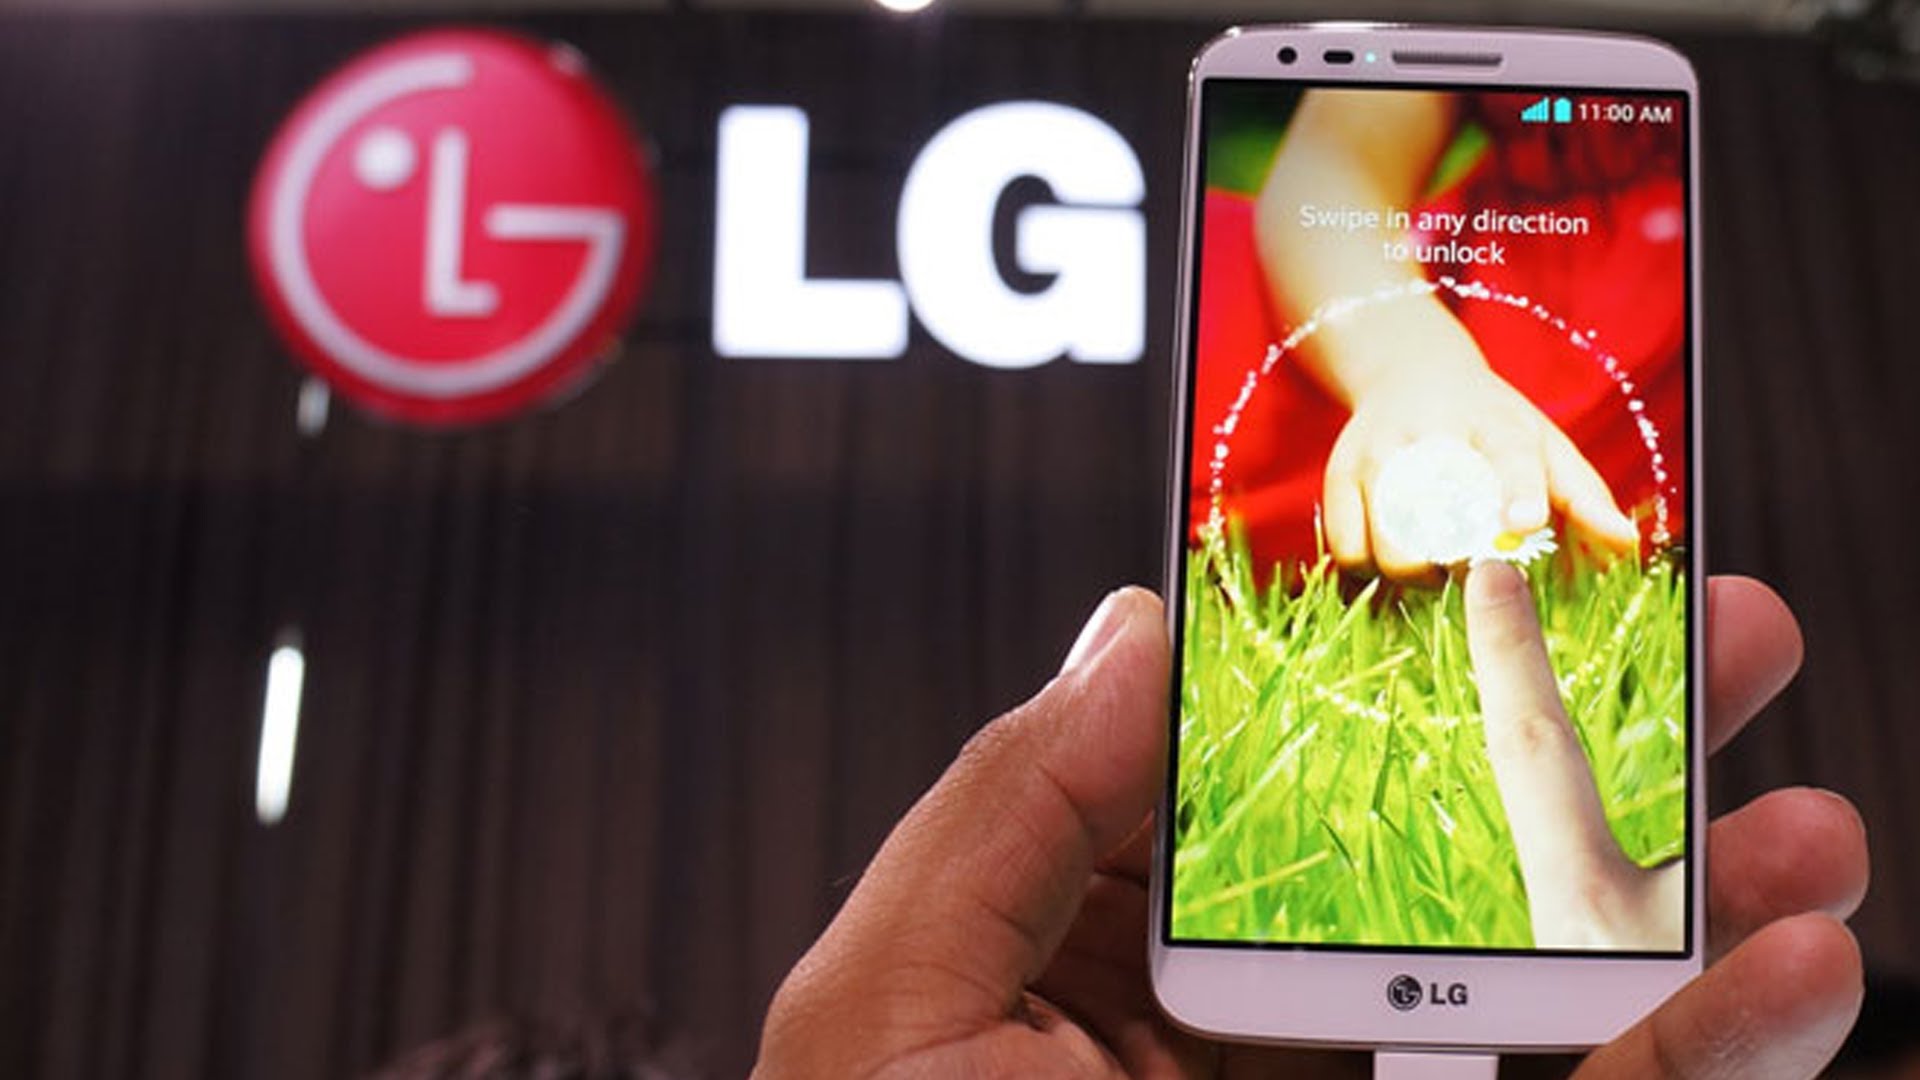 LG Announces The G3, Its New Flagship Smartphone